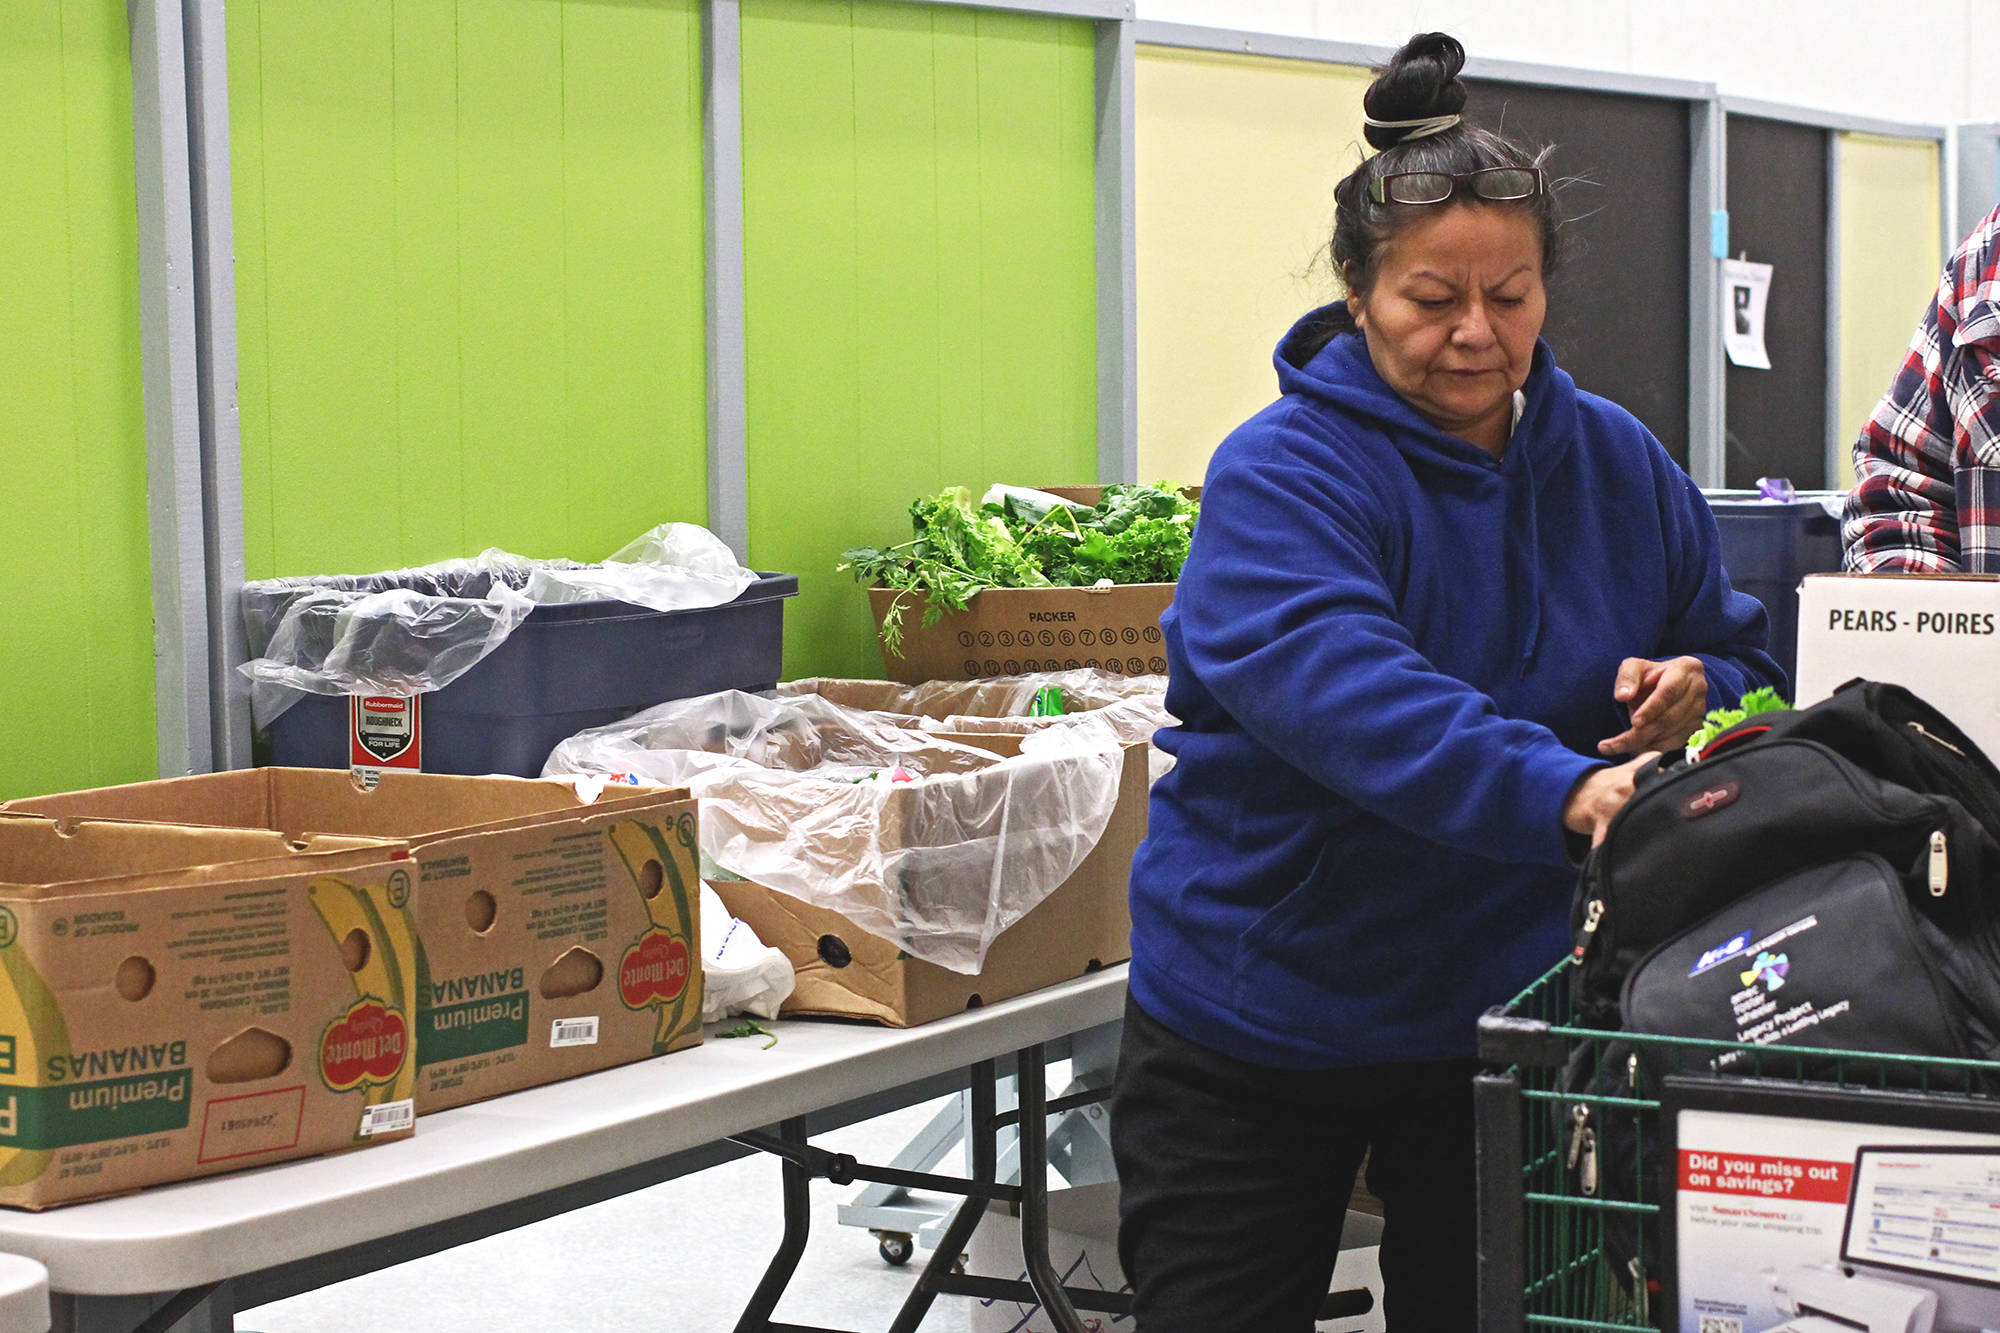 Ramona Paul, a resident who relies on the Salvation Army Food Bank, said she doesn’t know what she would do without this organization and the generosity the community has shown. (Jordyn Thomson/Western News)